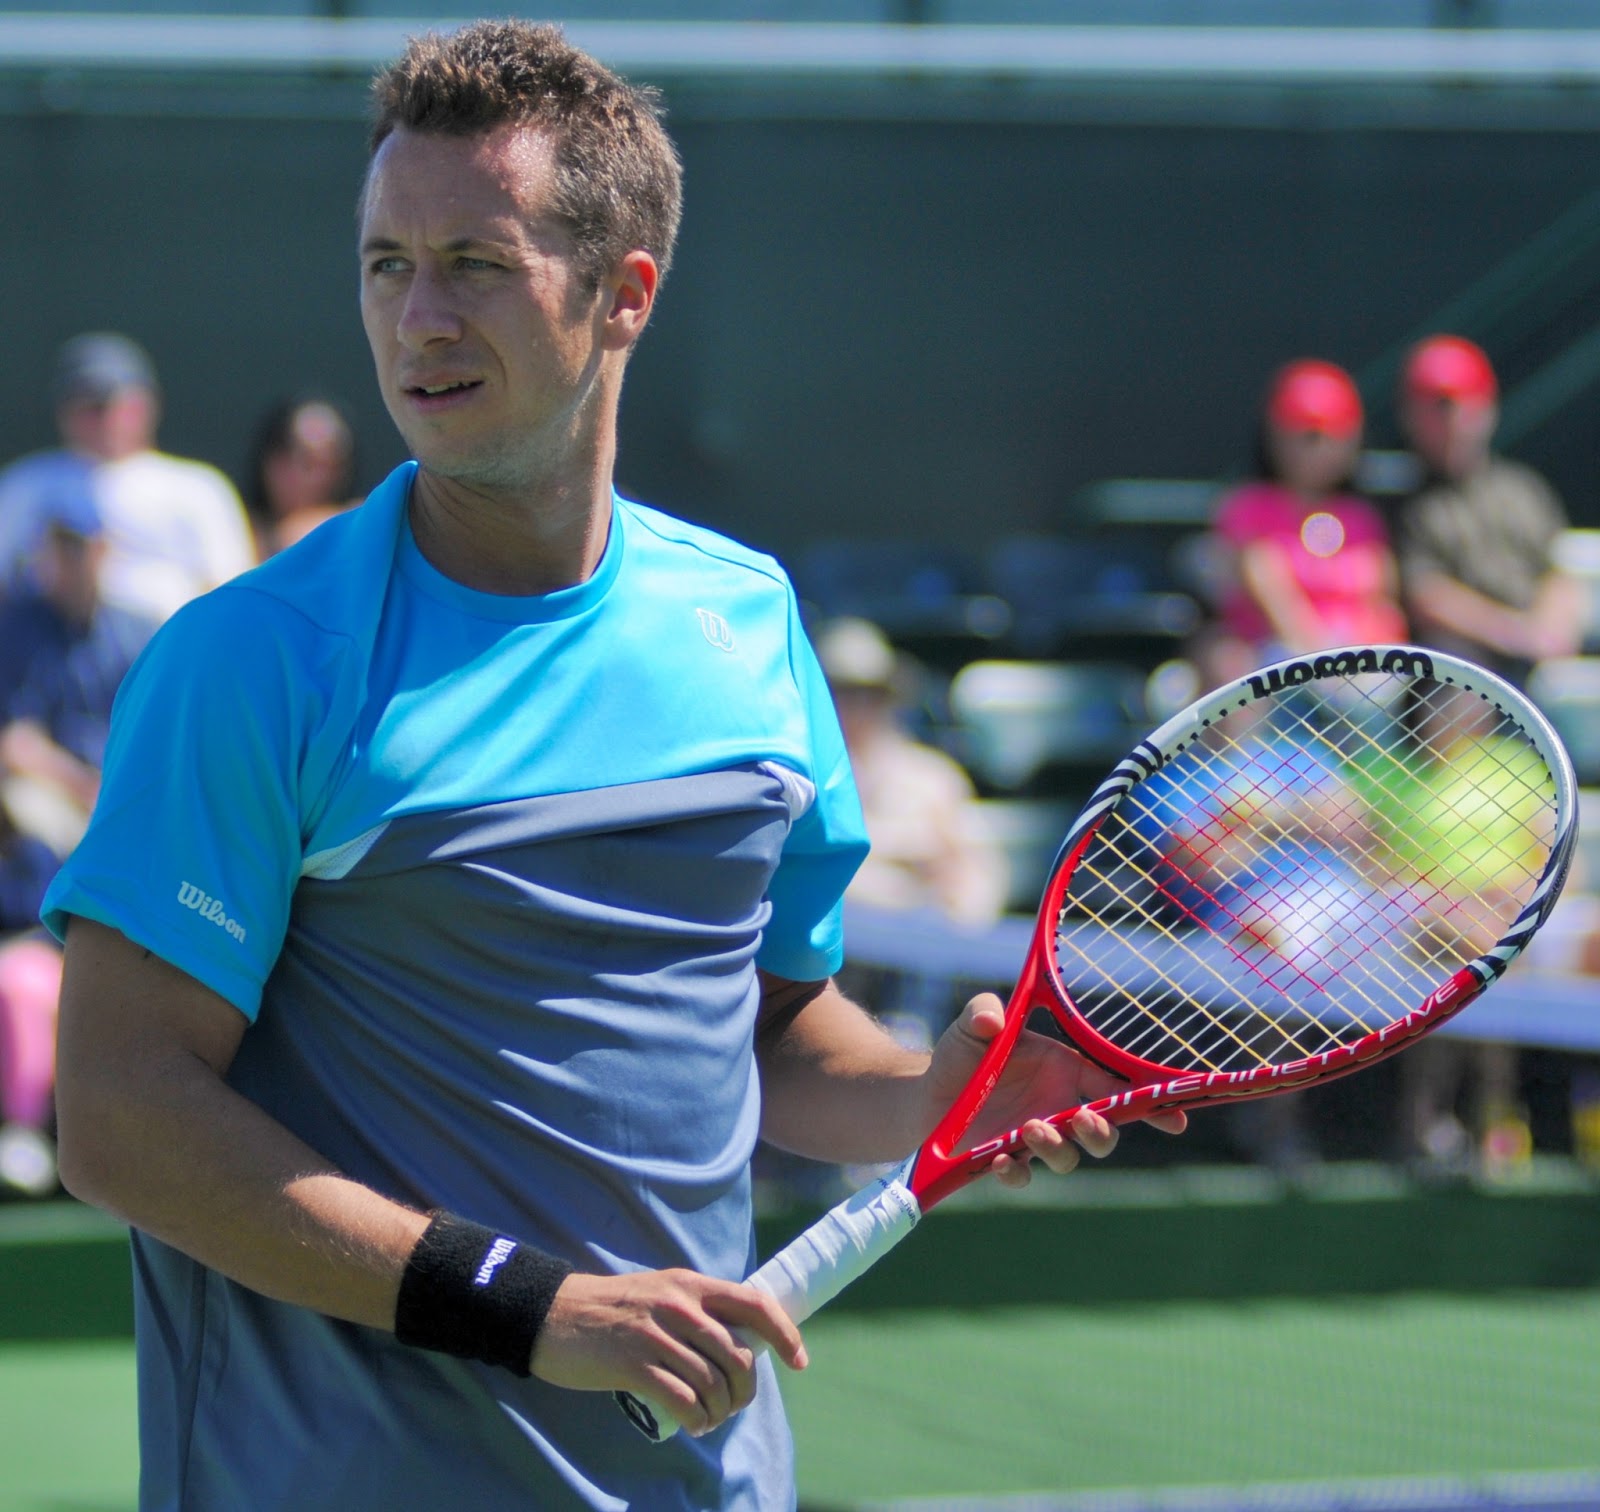 TENNIS: Philipp Kohlschreiber Profile and Images